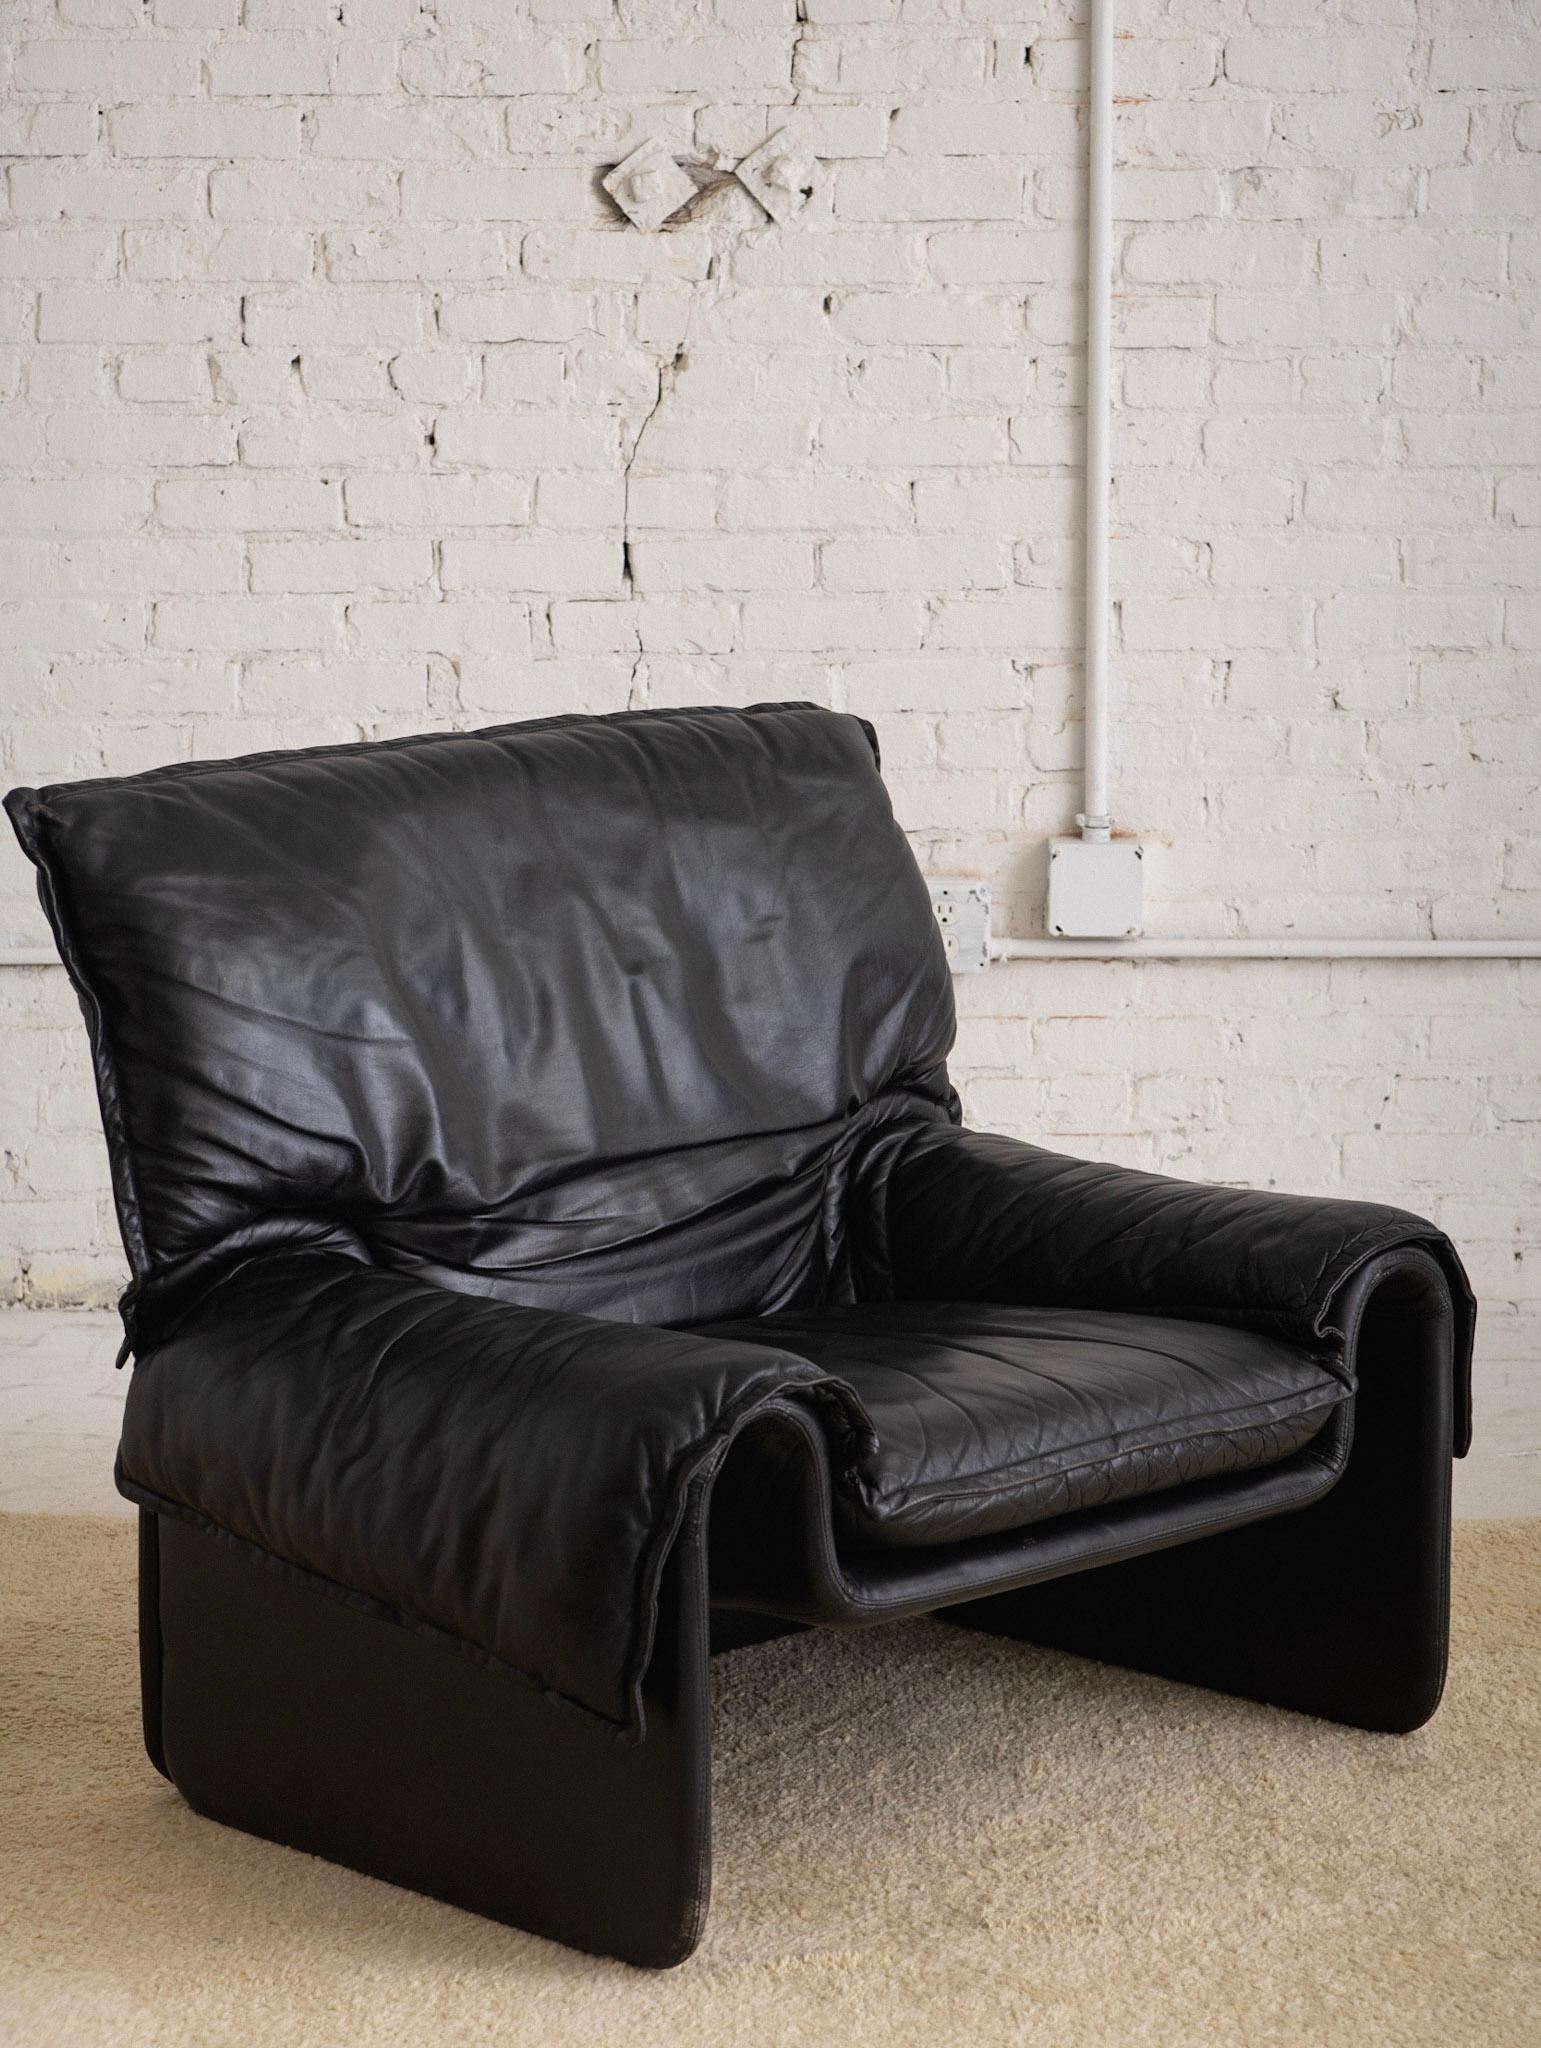 1970s Italian black leather lounge chair. Model “SARA” designed by Guido Faleschini for Mariani. No tags present. The last photo shows a 1978 Casa Vogue Italia advertisement for the “SARA” chair and sofa set by Mariani.